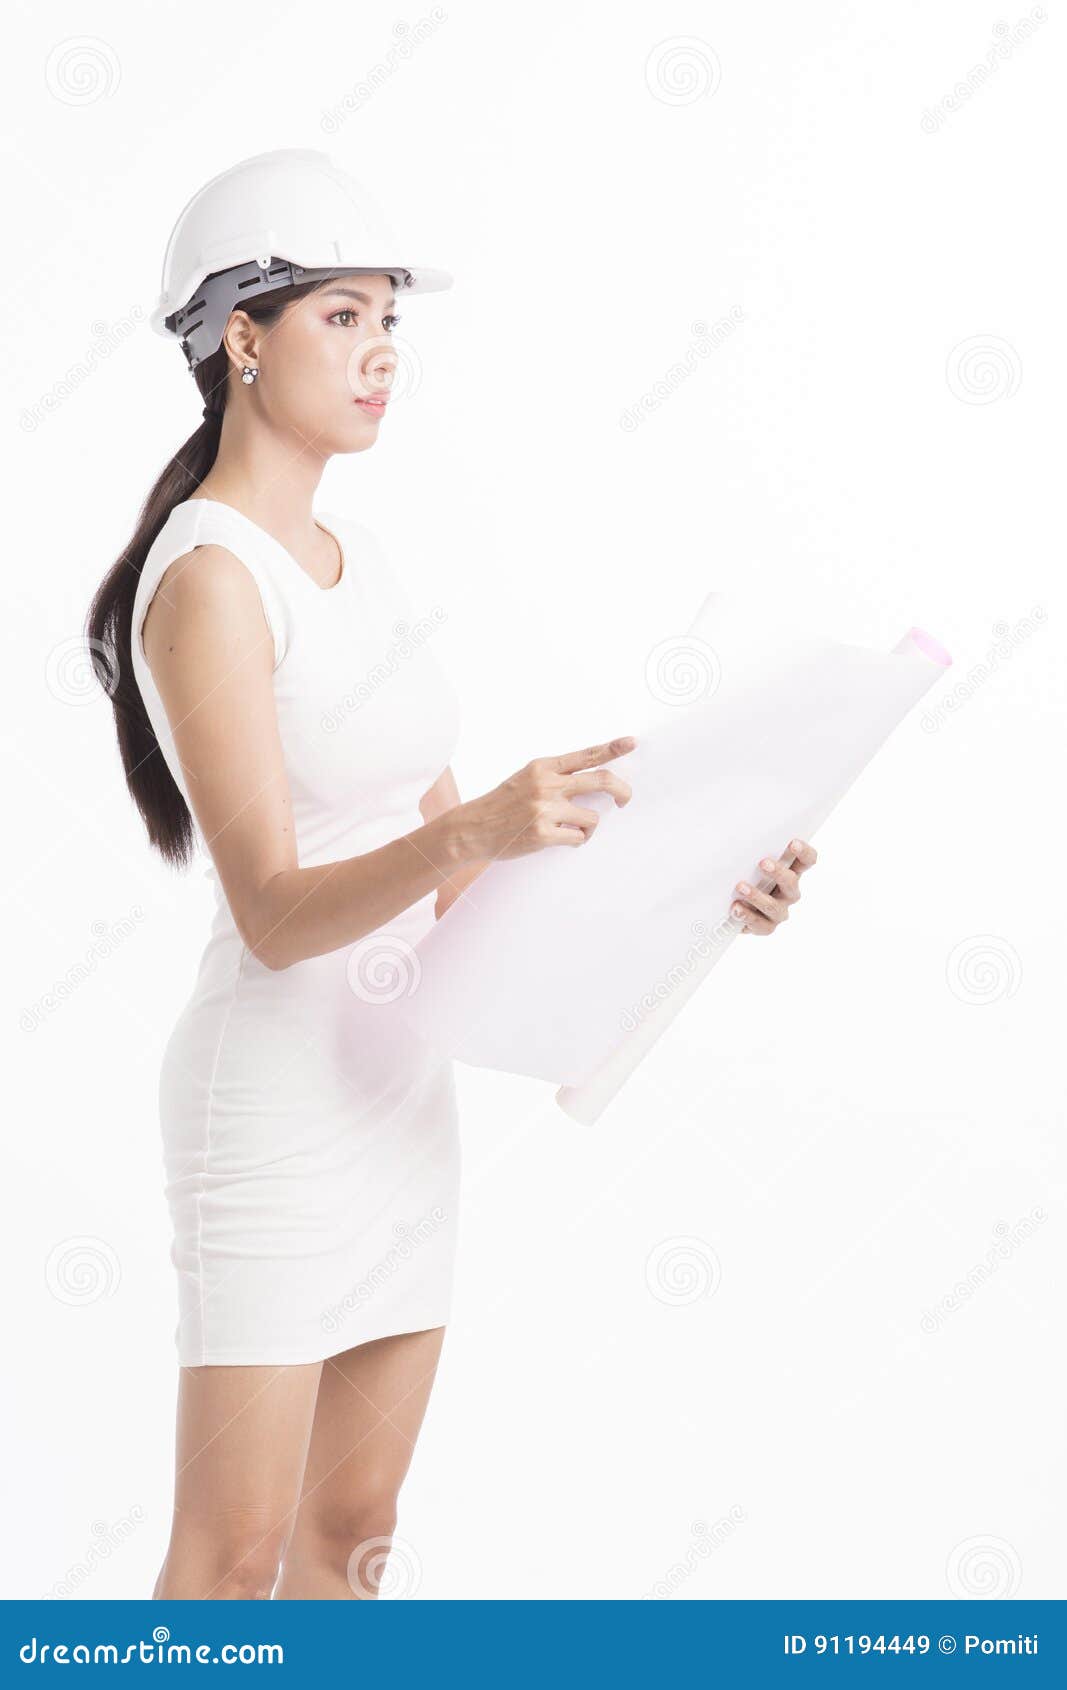 Girl Structural Engineer Stock Image Image Of Attractive 91194449